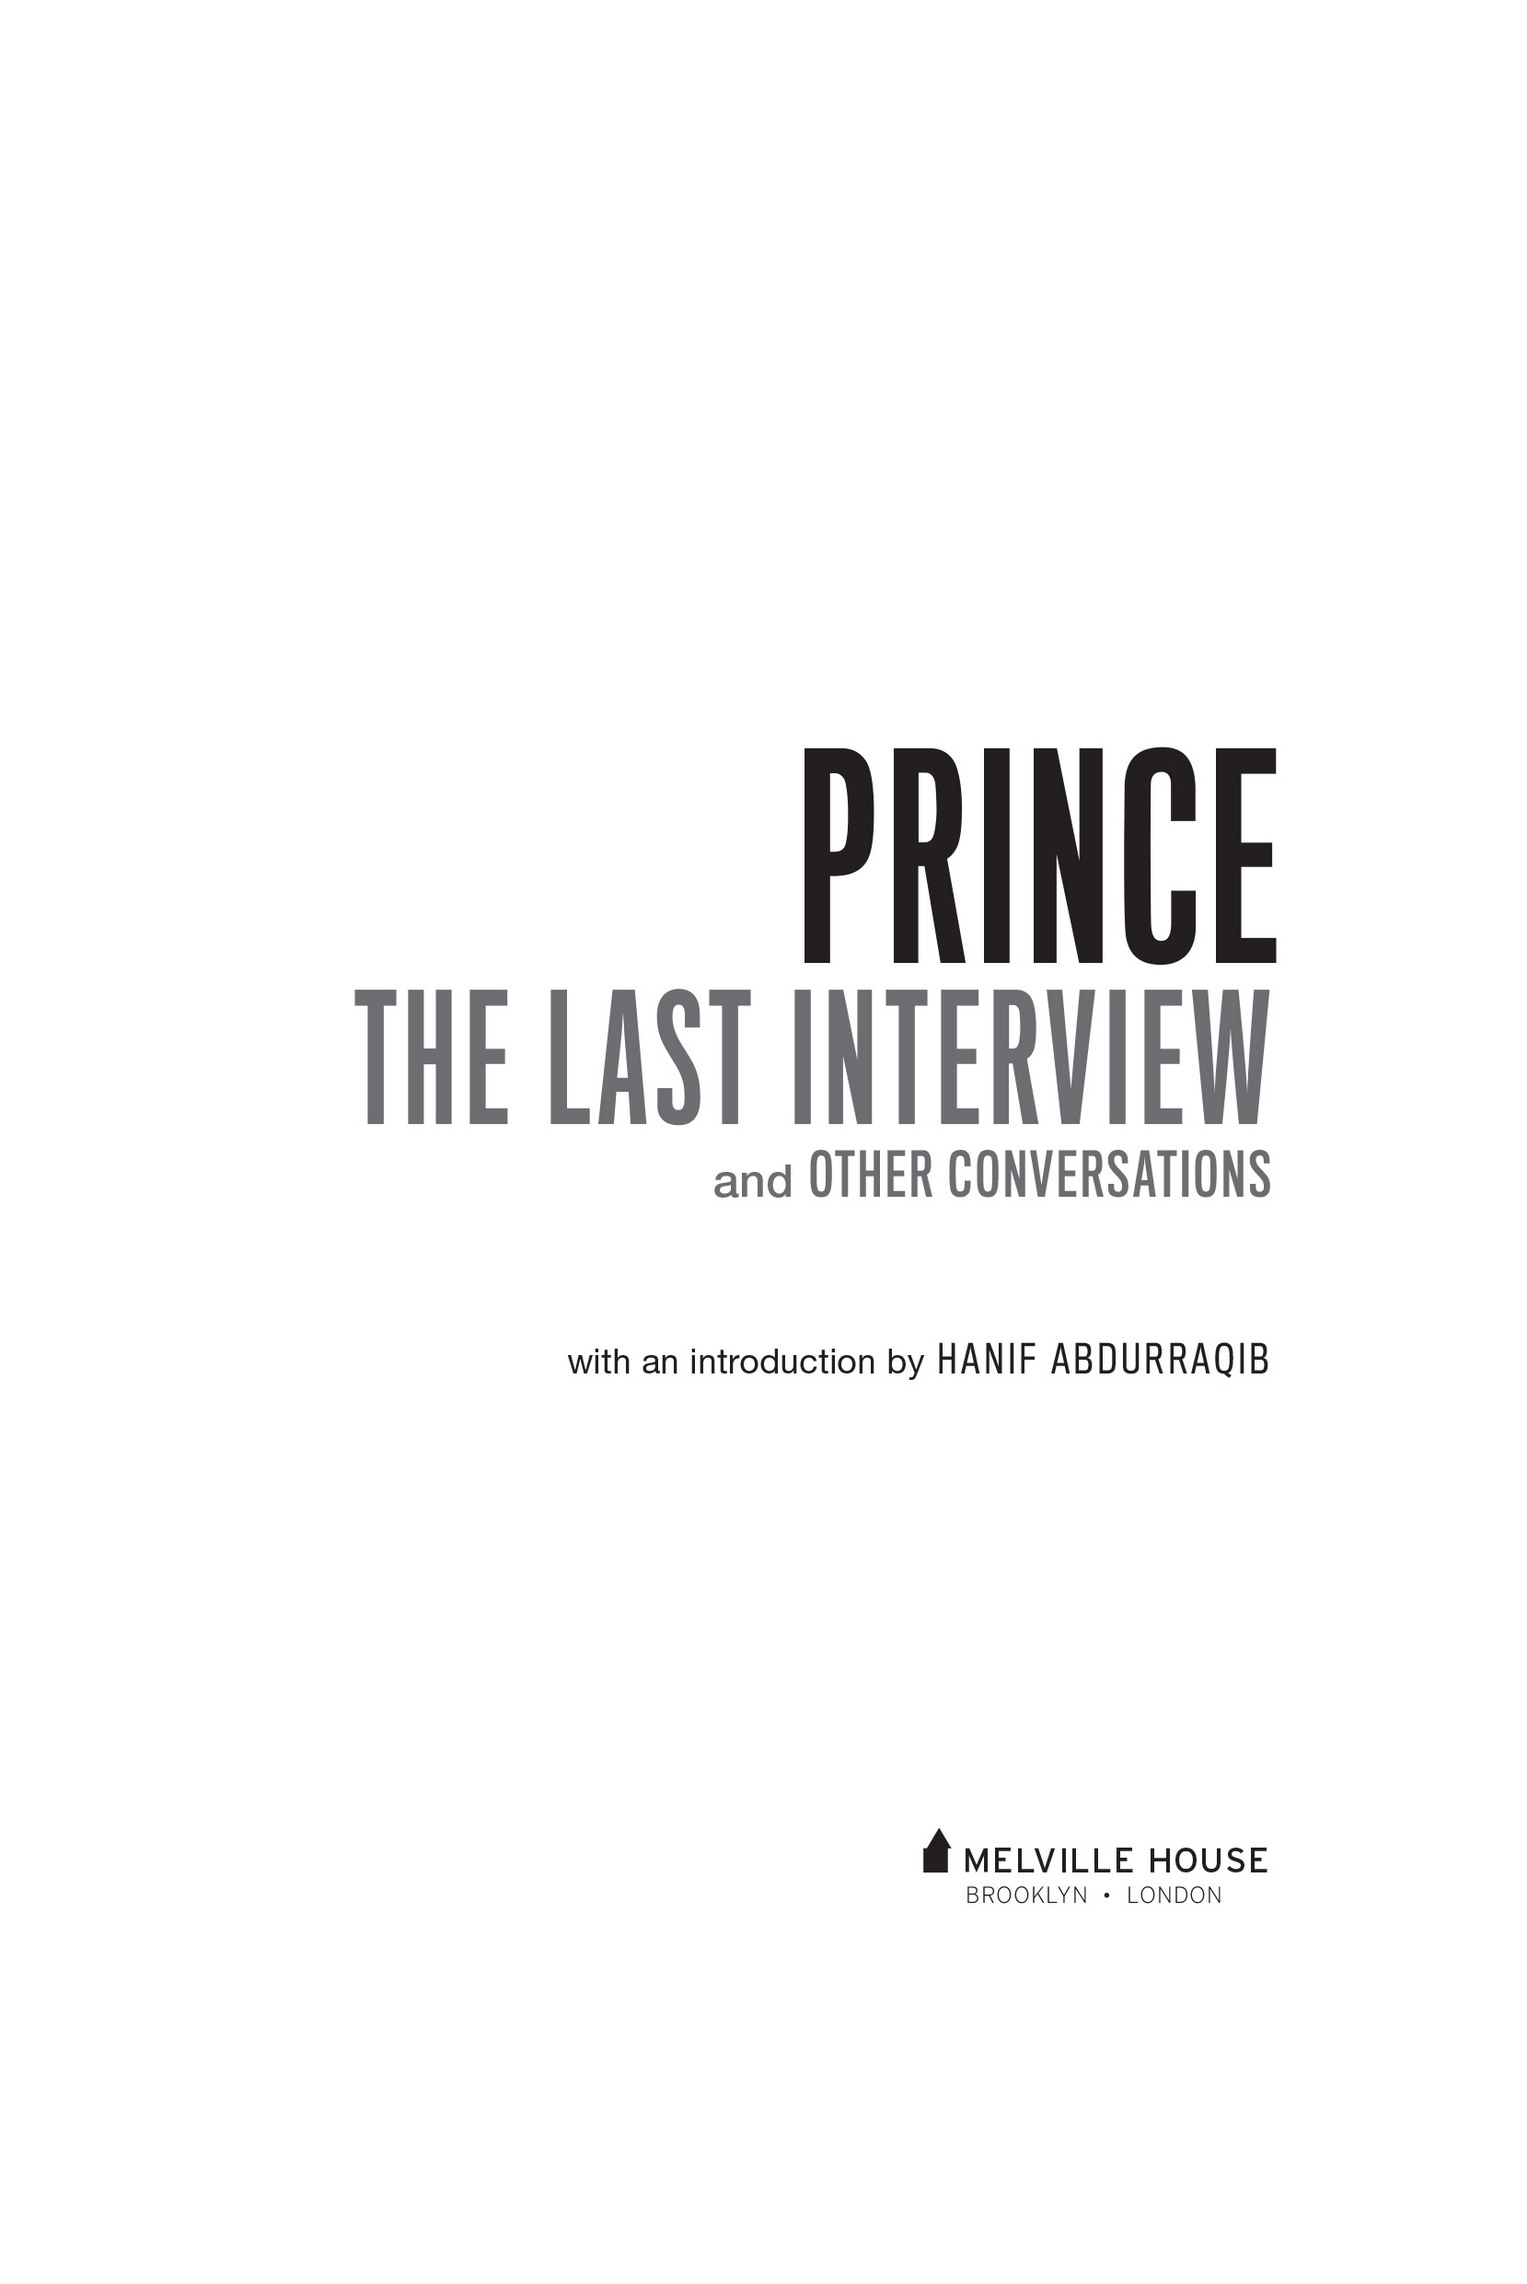 PRINCE THE LAST INTERVIEW AND OTHER CONVERSATIONS Copyright 2019 by Melville - photo 2